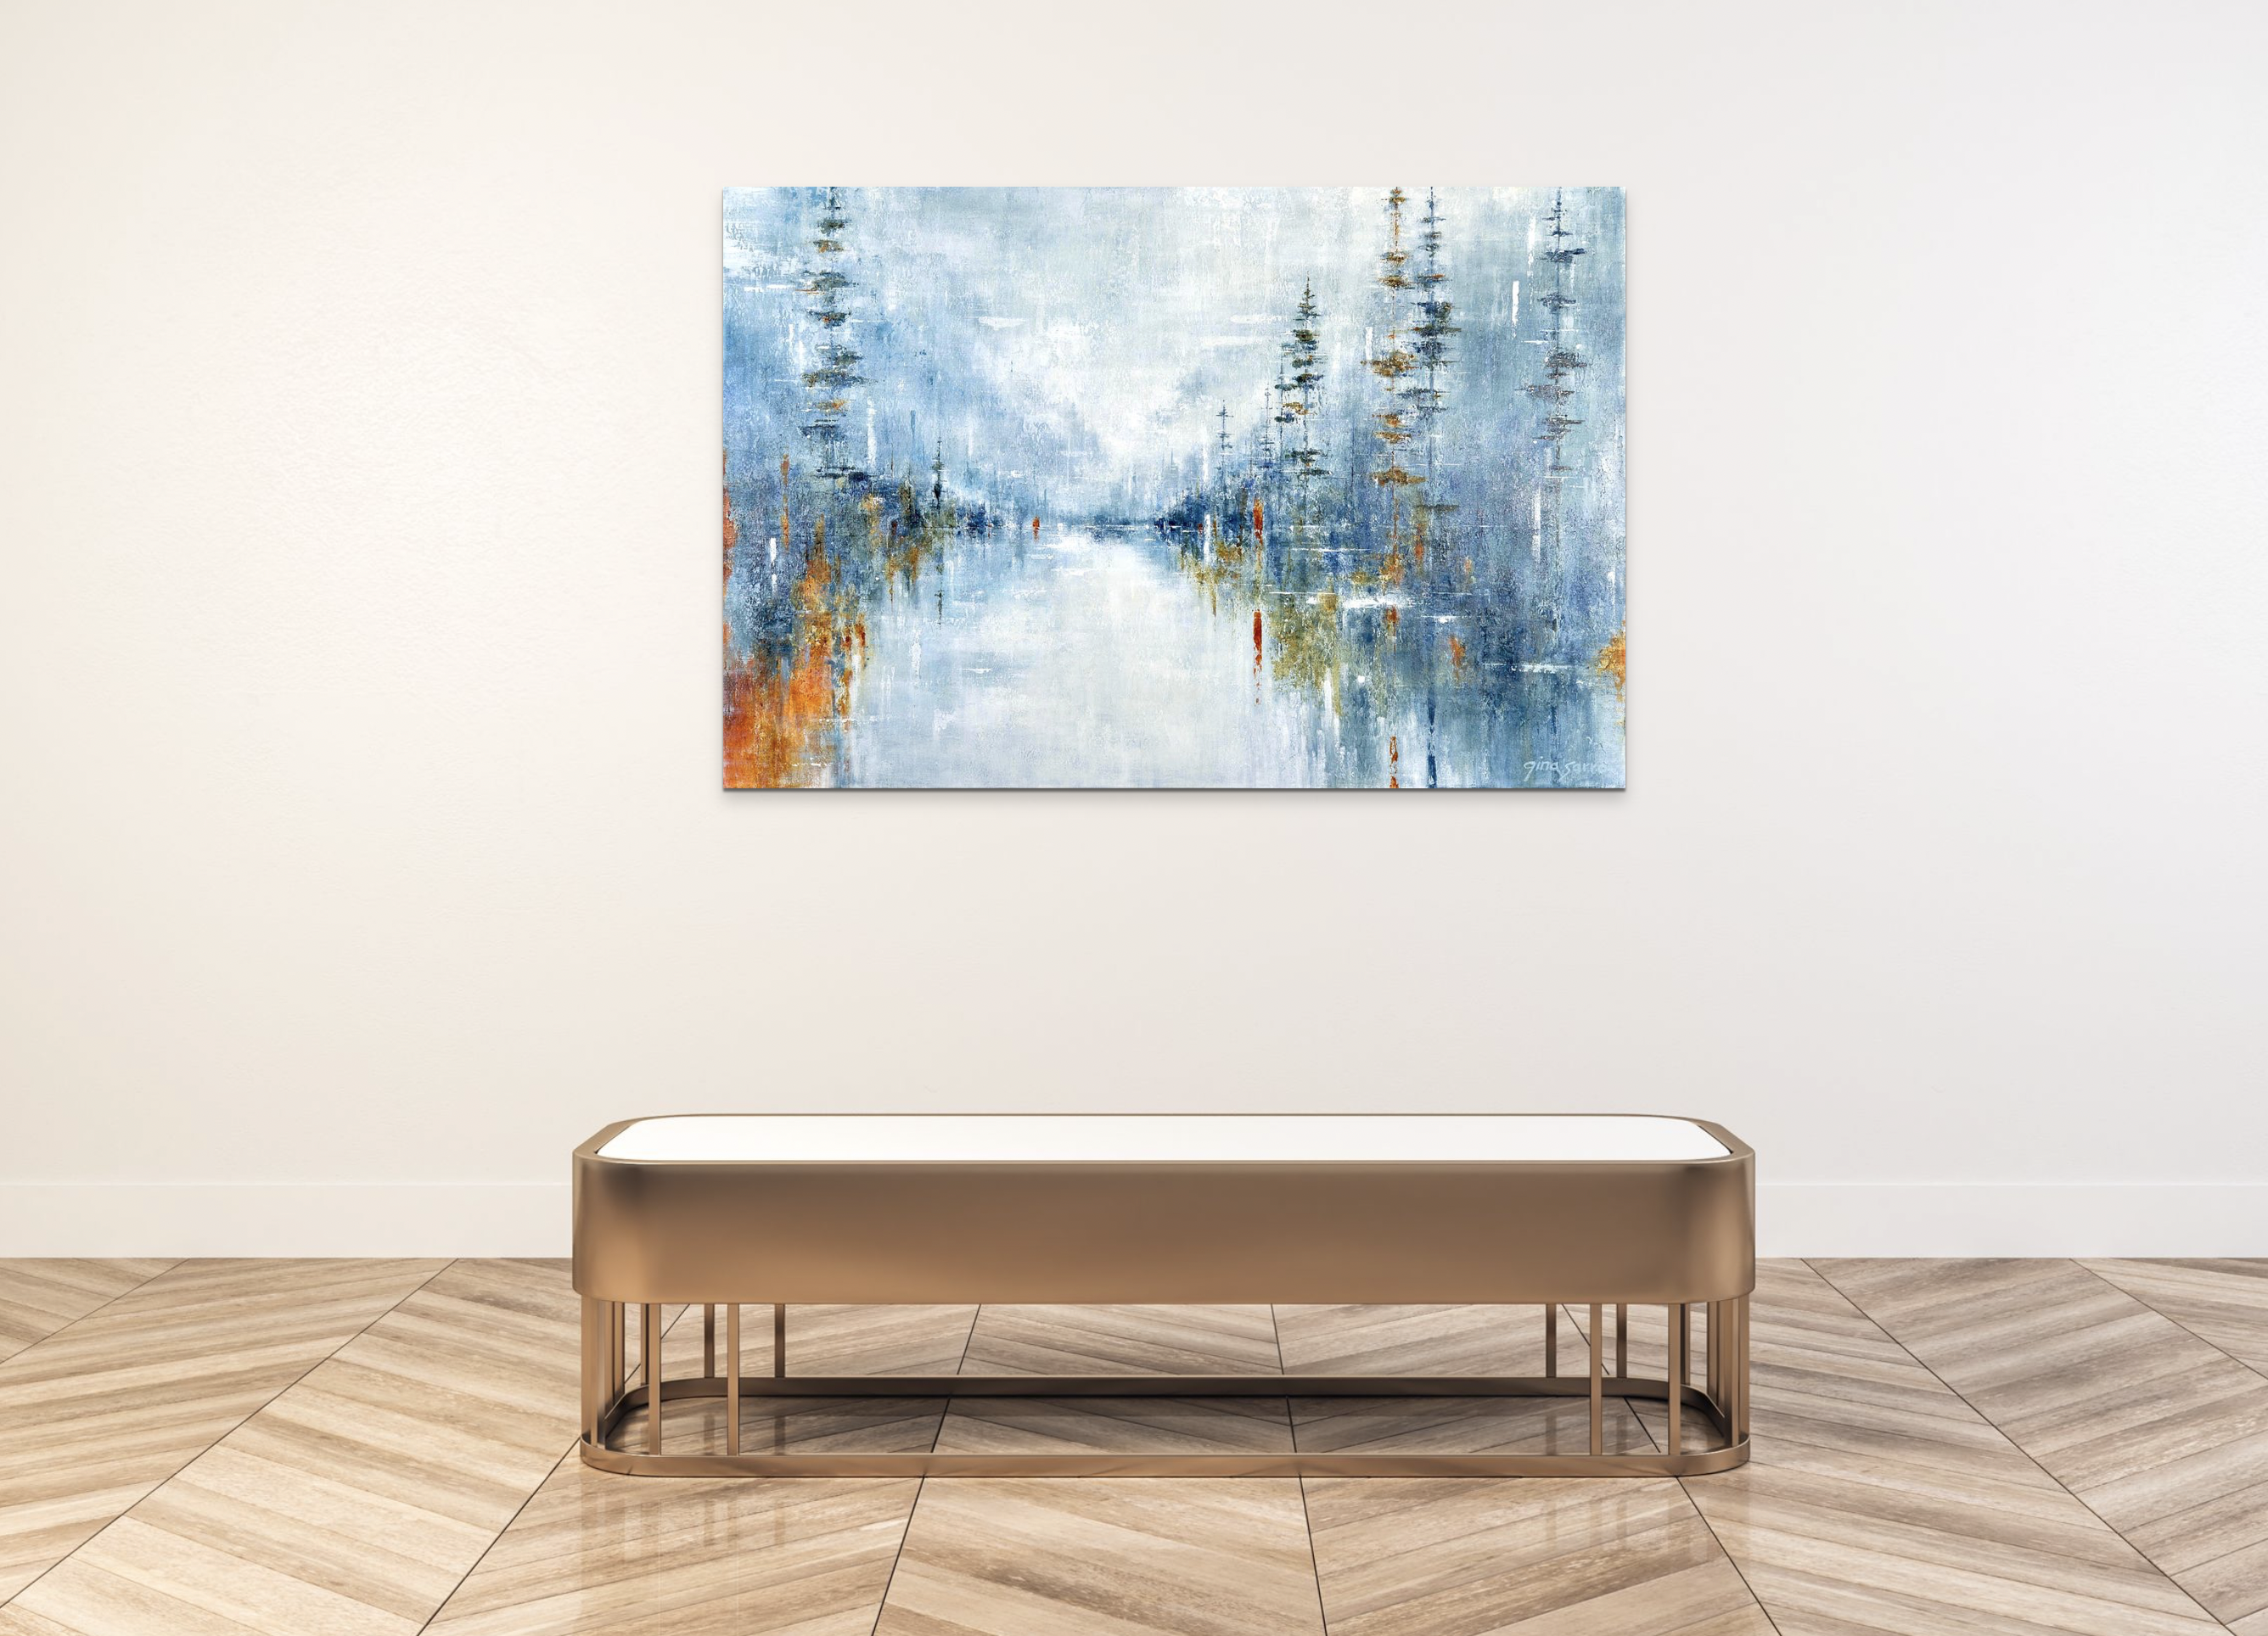 A Place of Our Own, acrylic landscape painting by Gina Sarro | Effusion Art Gallery + Cast Glass Studio, Invermere BC